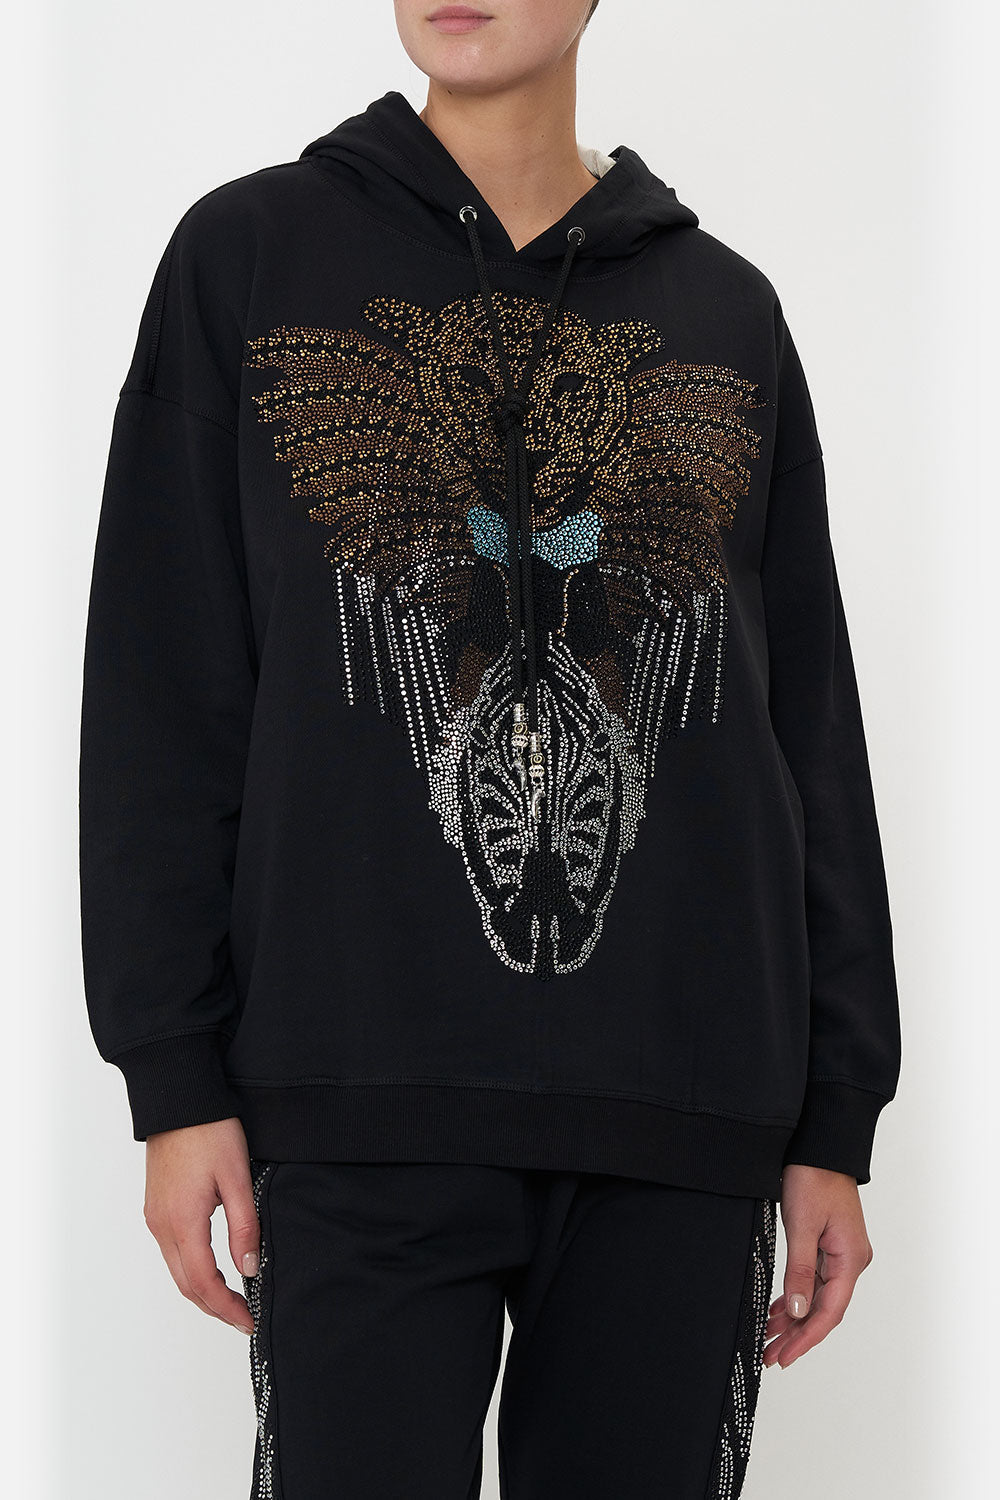 HOODY SWEATER WITH POCKETS KNIGHT OF THE WILD